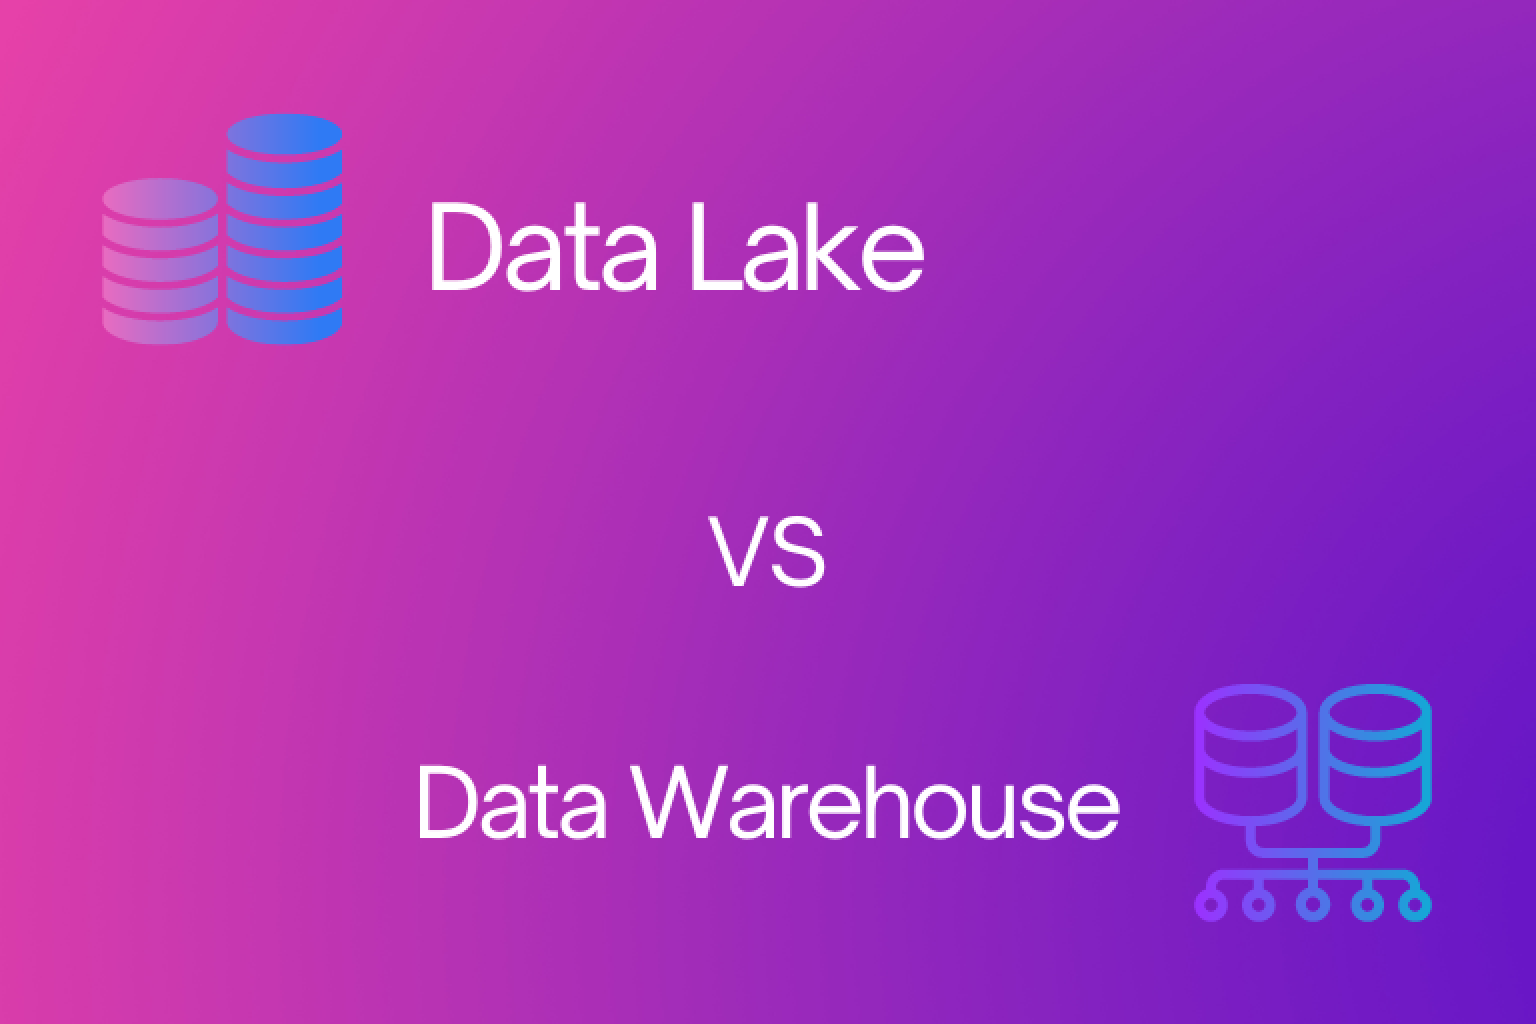 Explore the key differences between data lakes and data warehouses, and learn how to choose the right solution for your organization's data storage and analysis needs.